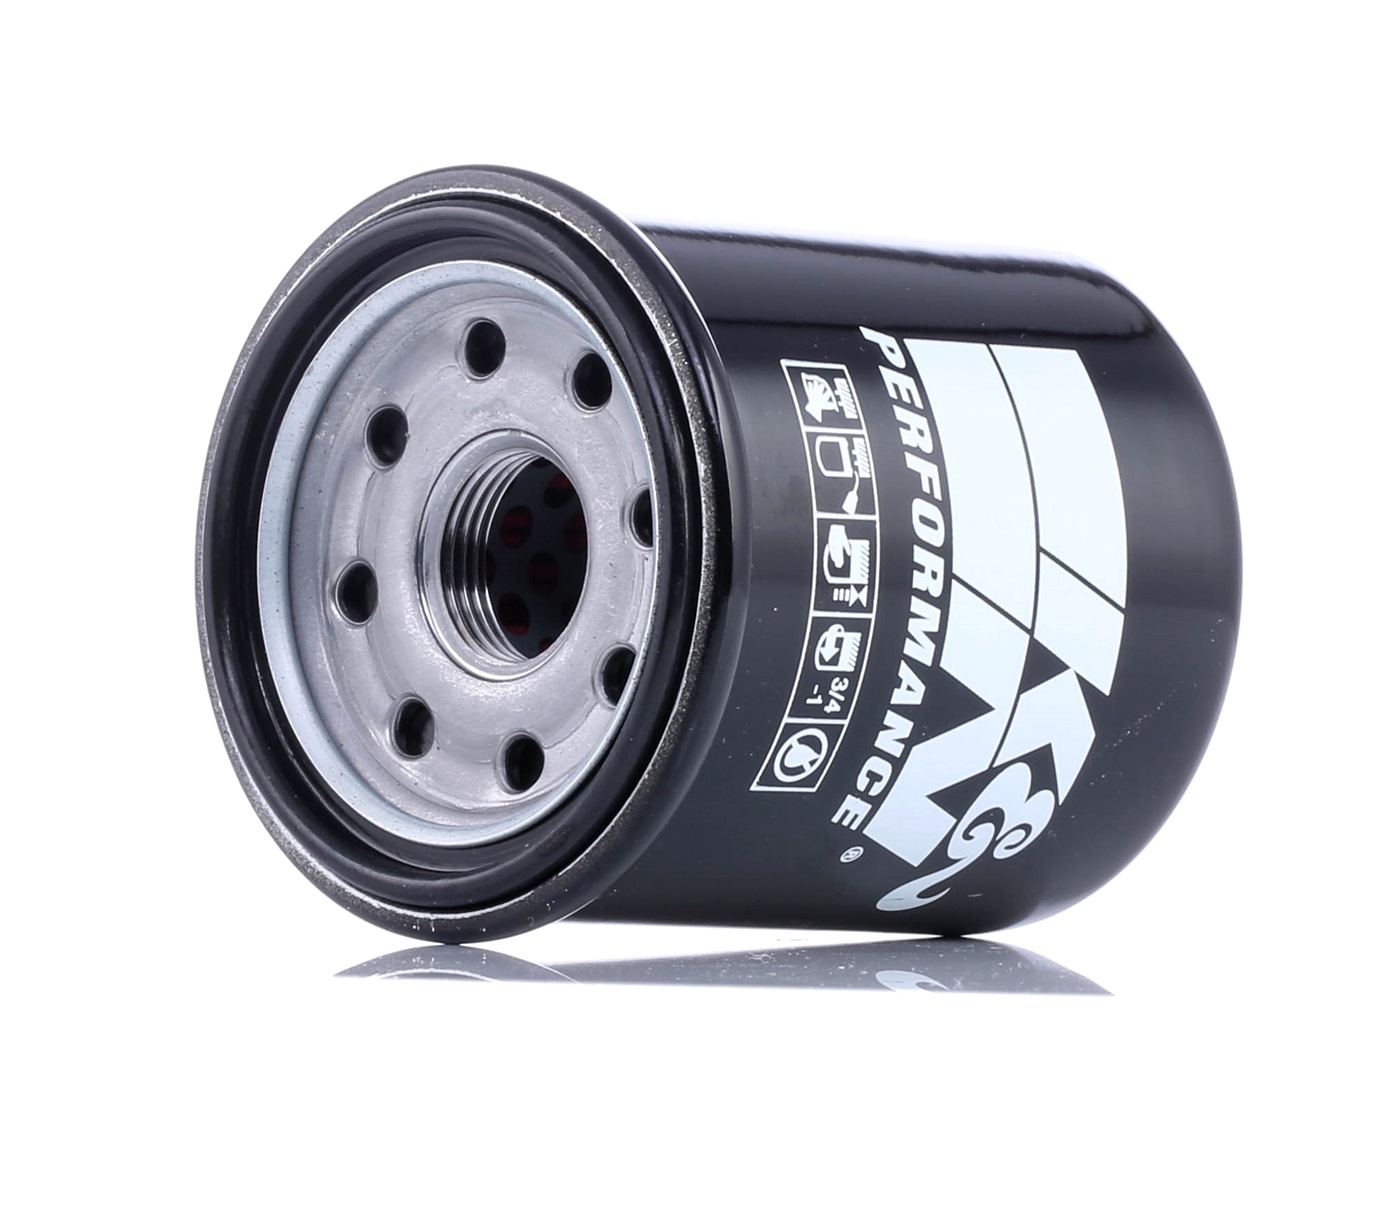 Oliefilter K&N Filters KN-303 CBR Motorfiets Brommer Maxiscooter